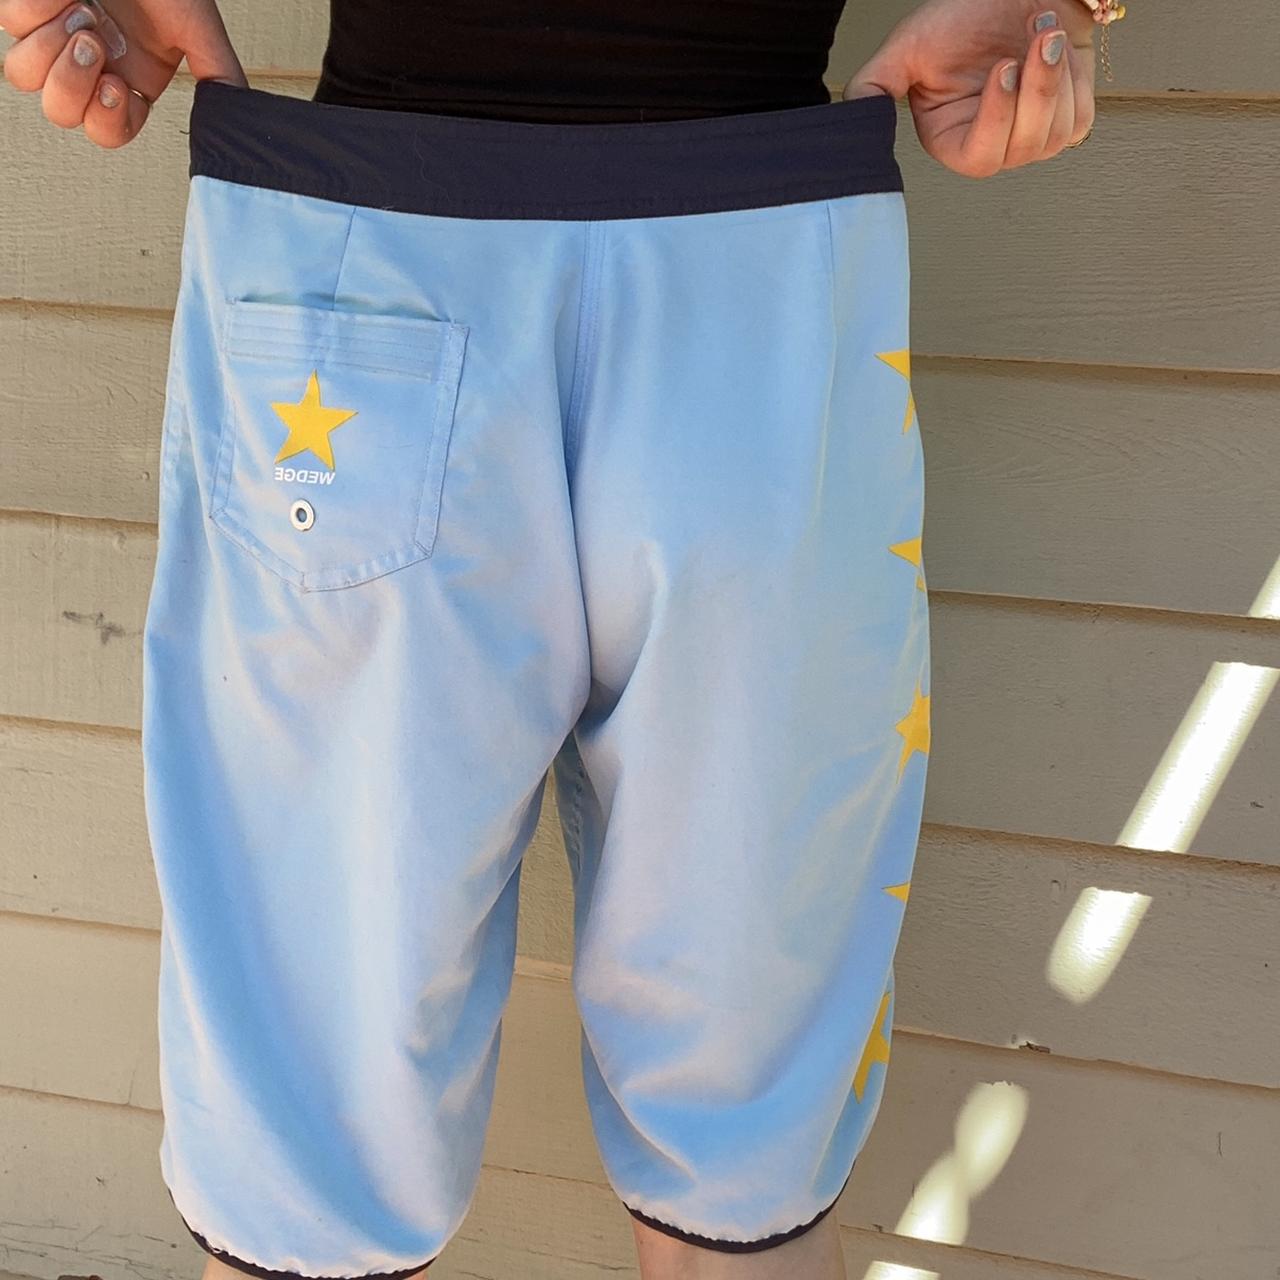 Product Image 3 - Light blue board shorts with